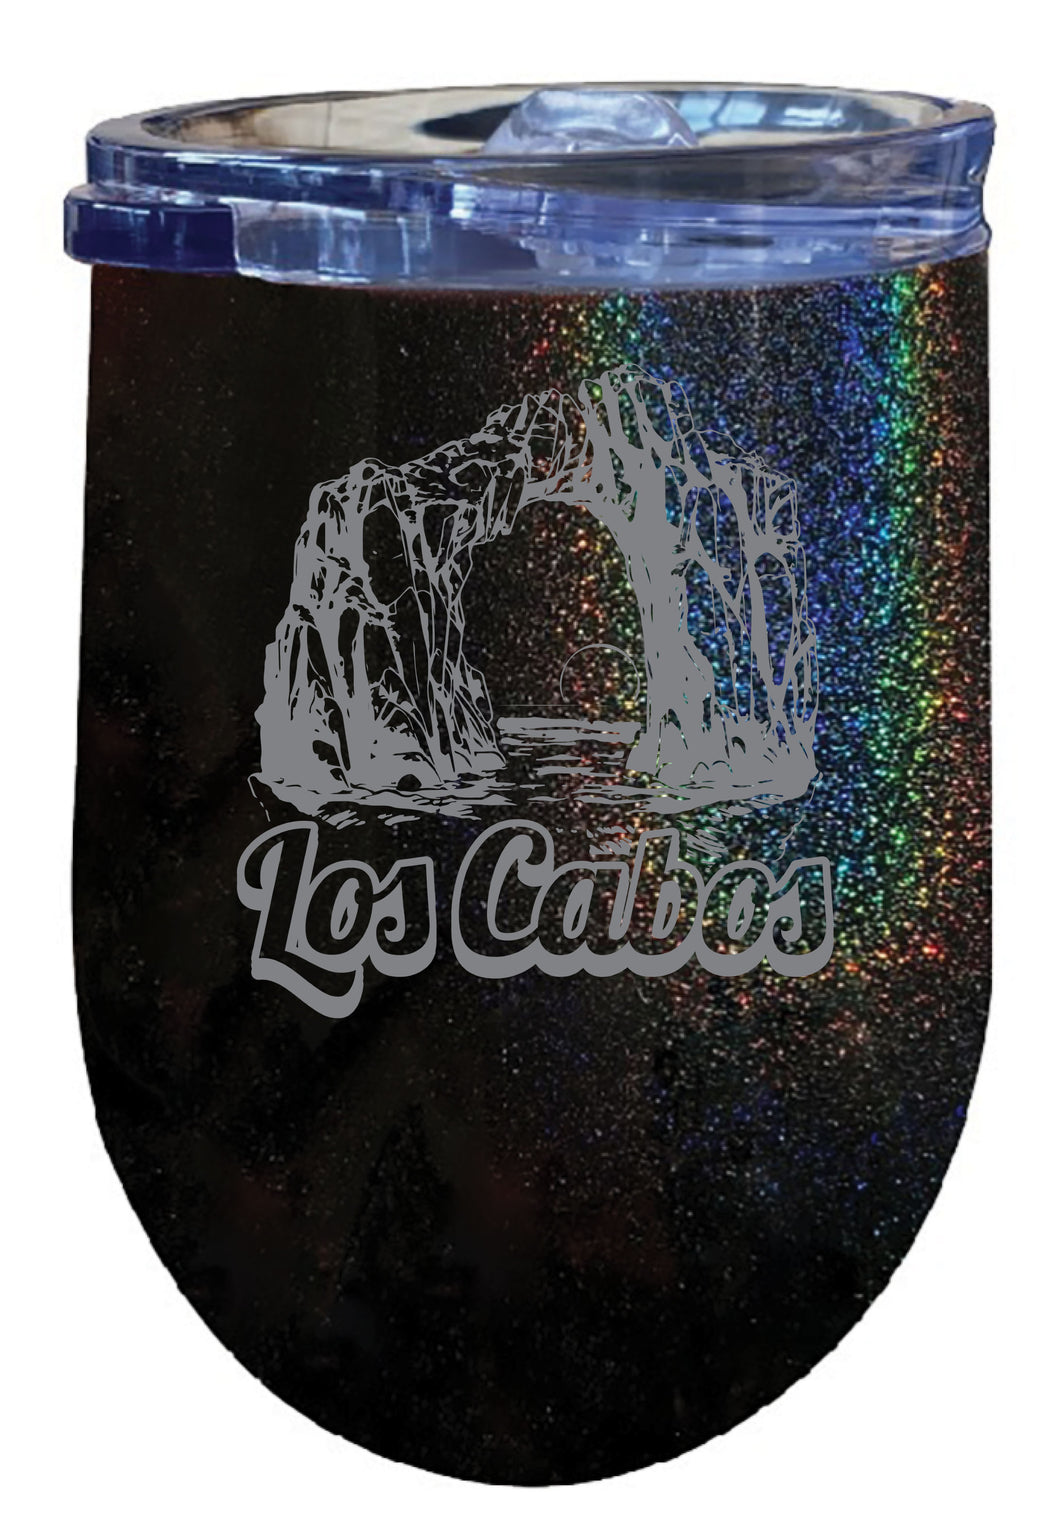 Los Cabos Mexico Souvenir 12 oz Engraved Insulated Wine Stainless Steel Tumbler